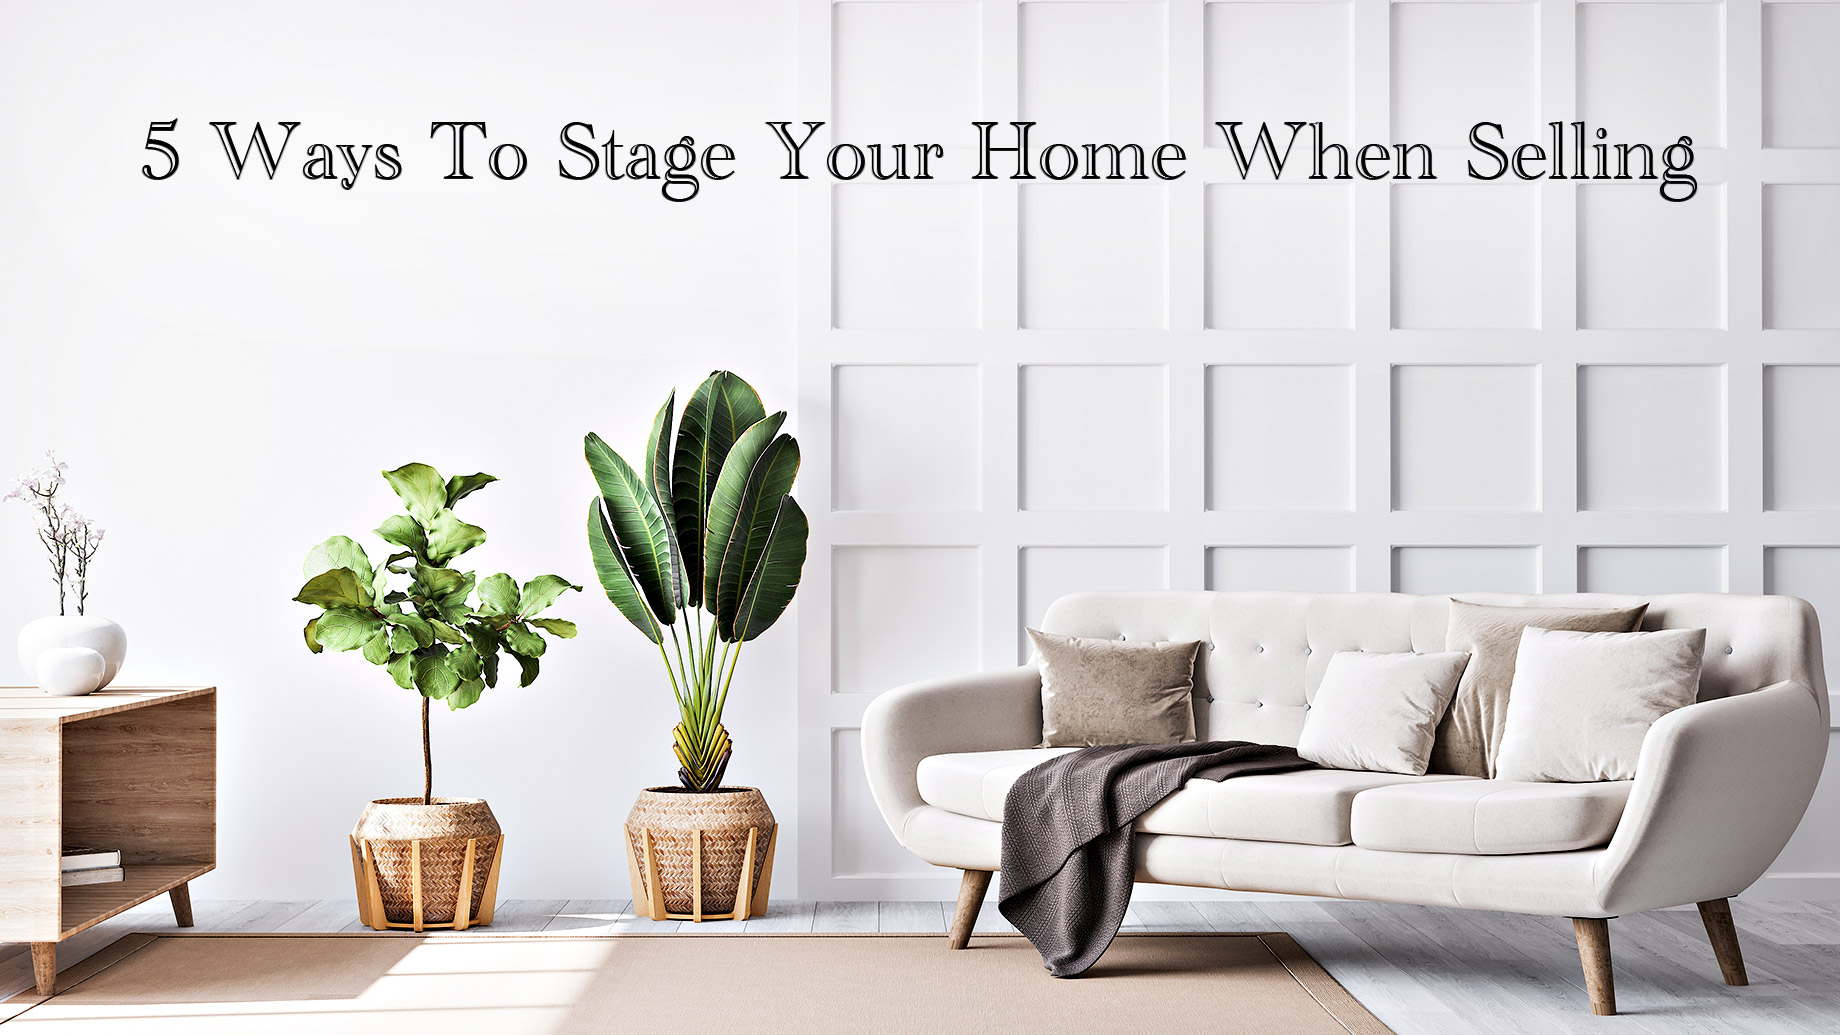 5 Ways To Stage Your Home When Selling